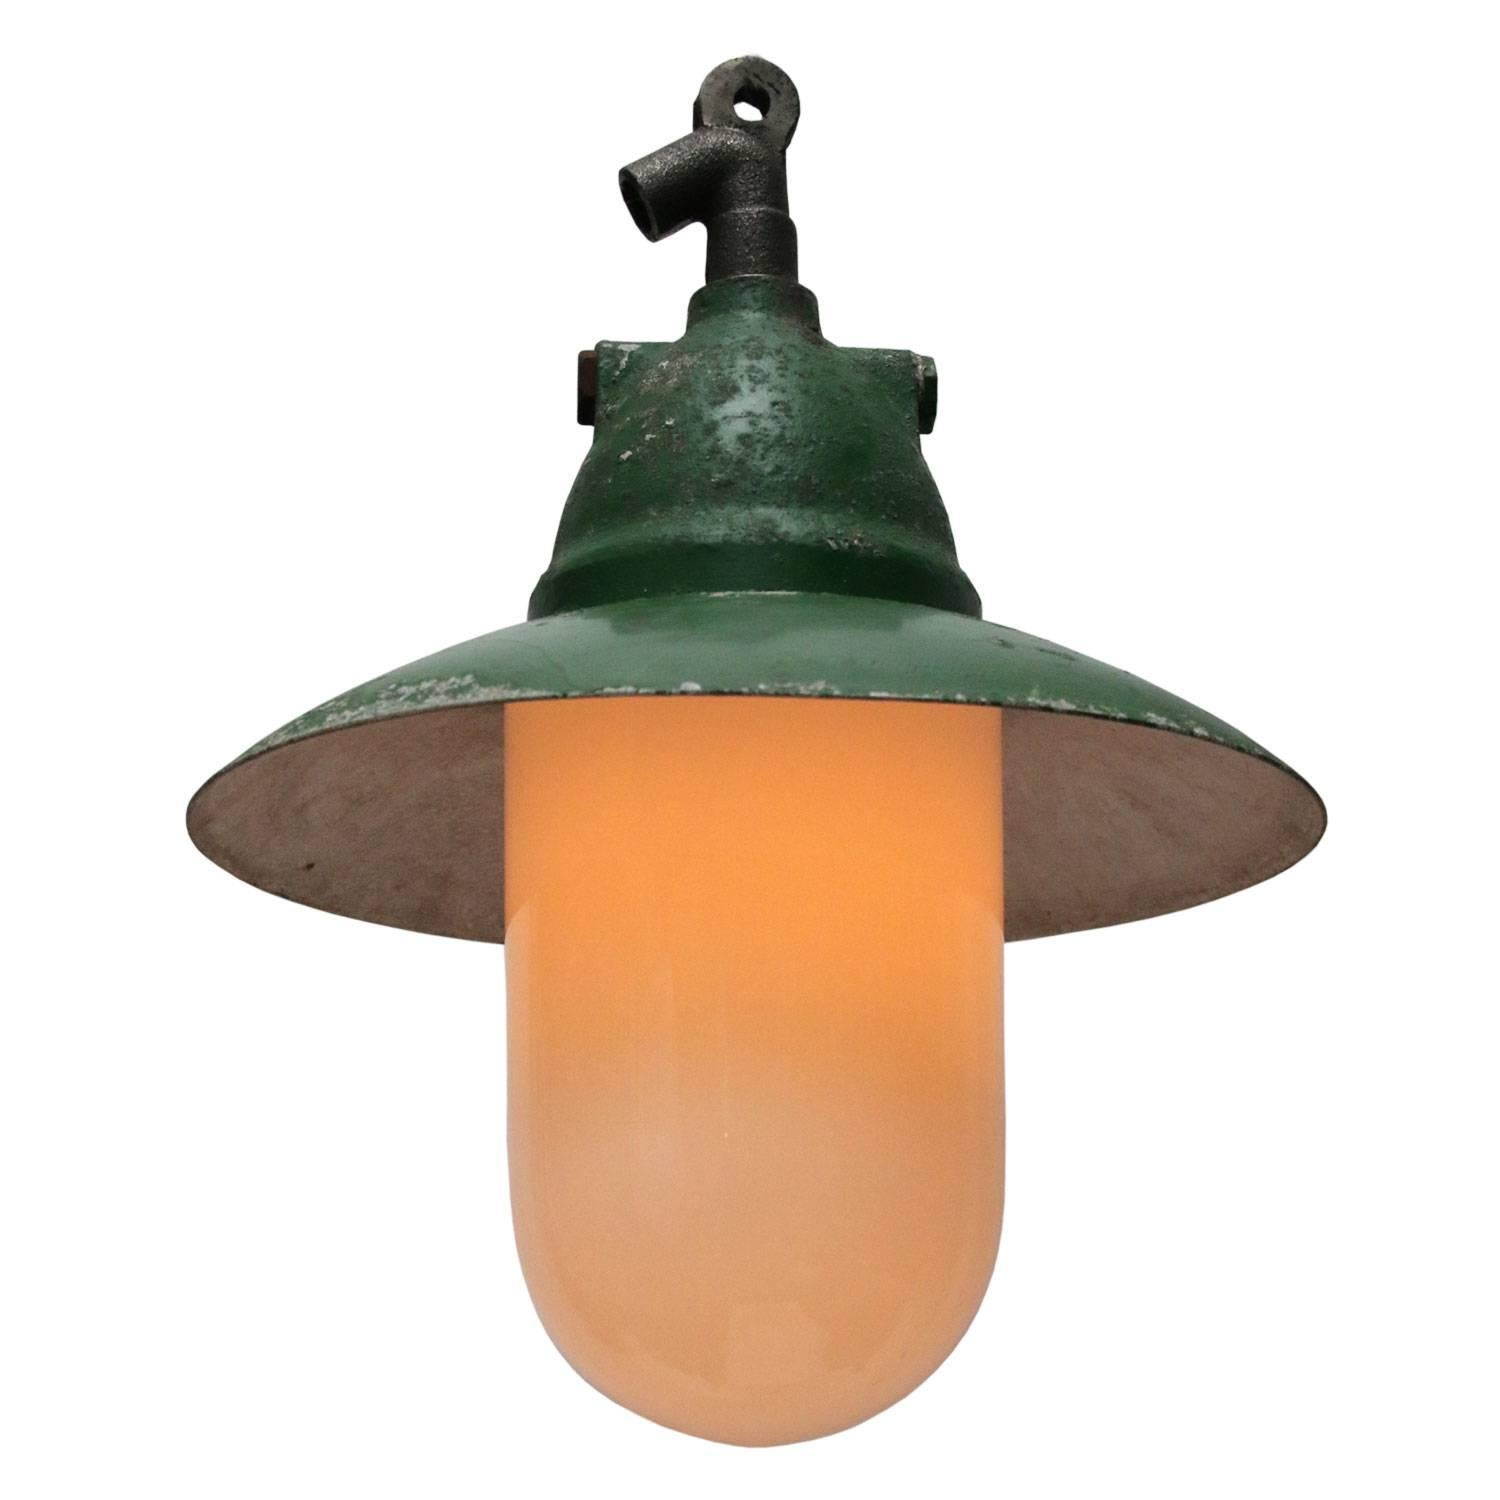 Industrial hanging lamp. Green cast aluminium.
White Opaline glass.

Weight: 3.6 kg / 7.9 lb

Priced individual item. All lamps have been made suitable by international standards for incandescent light bulbs, energy-efficient and LED bulbs. E26/E27